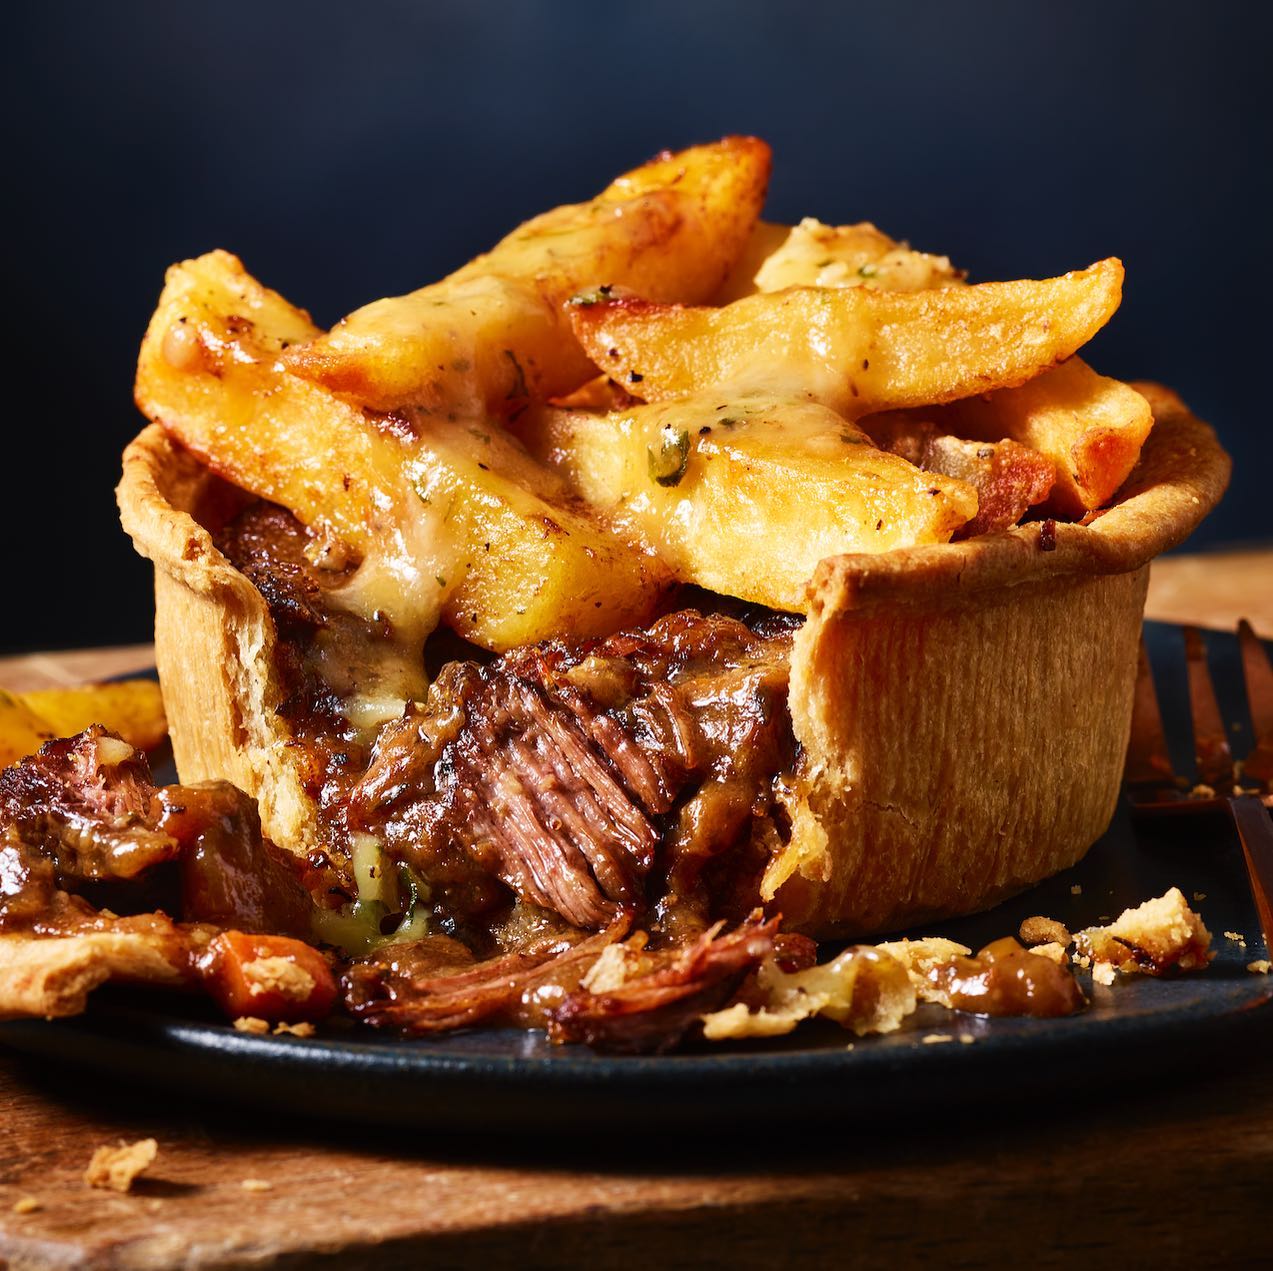 Marks and Spencer has created a steak and cheesy chips pie, The Manc